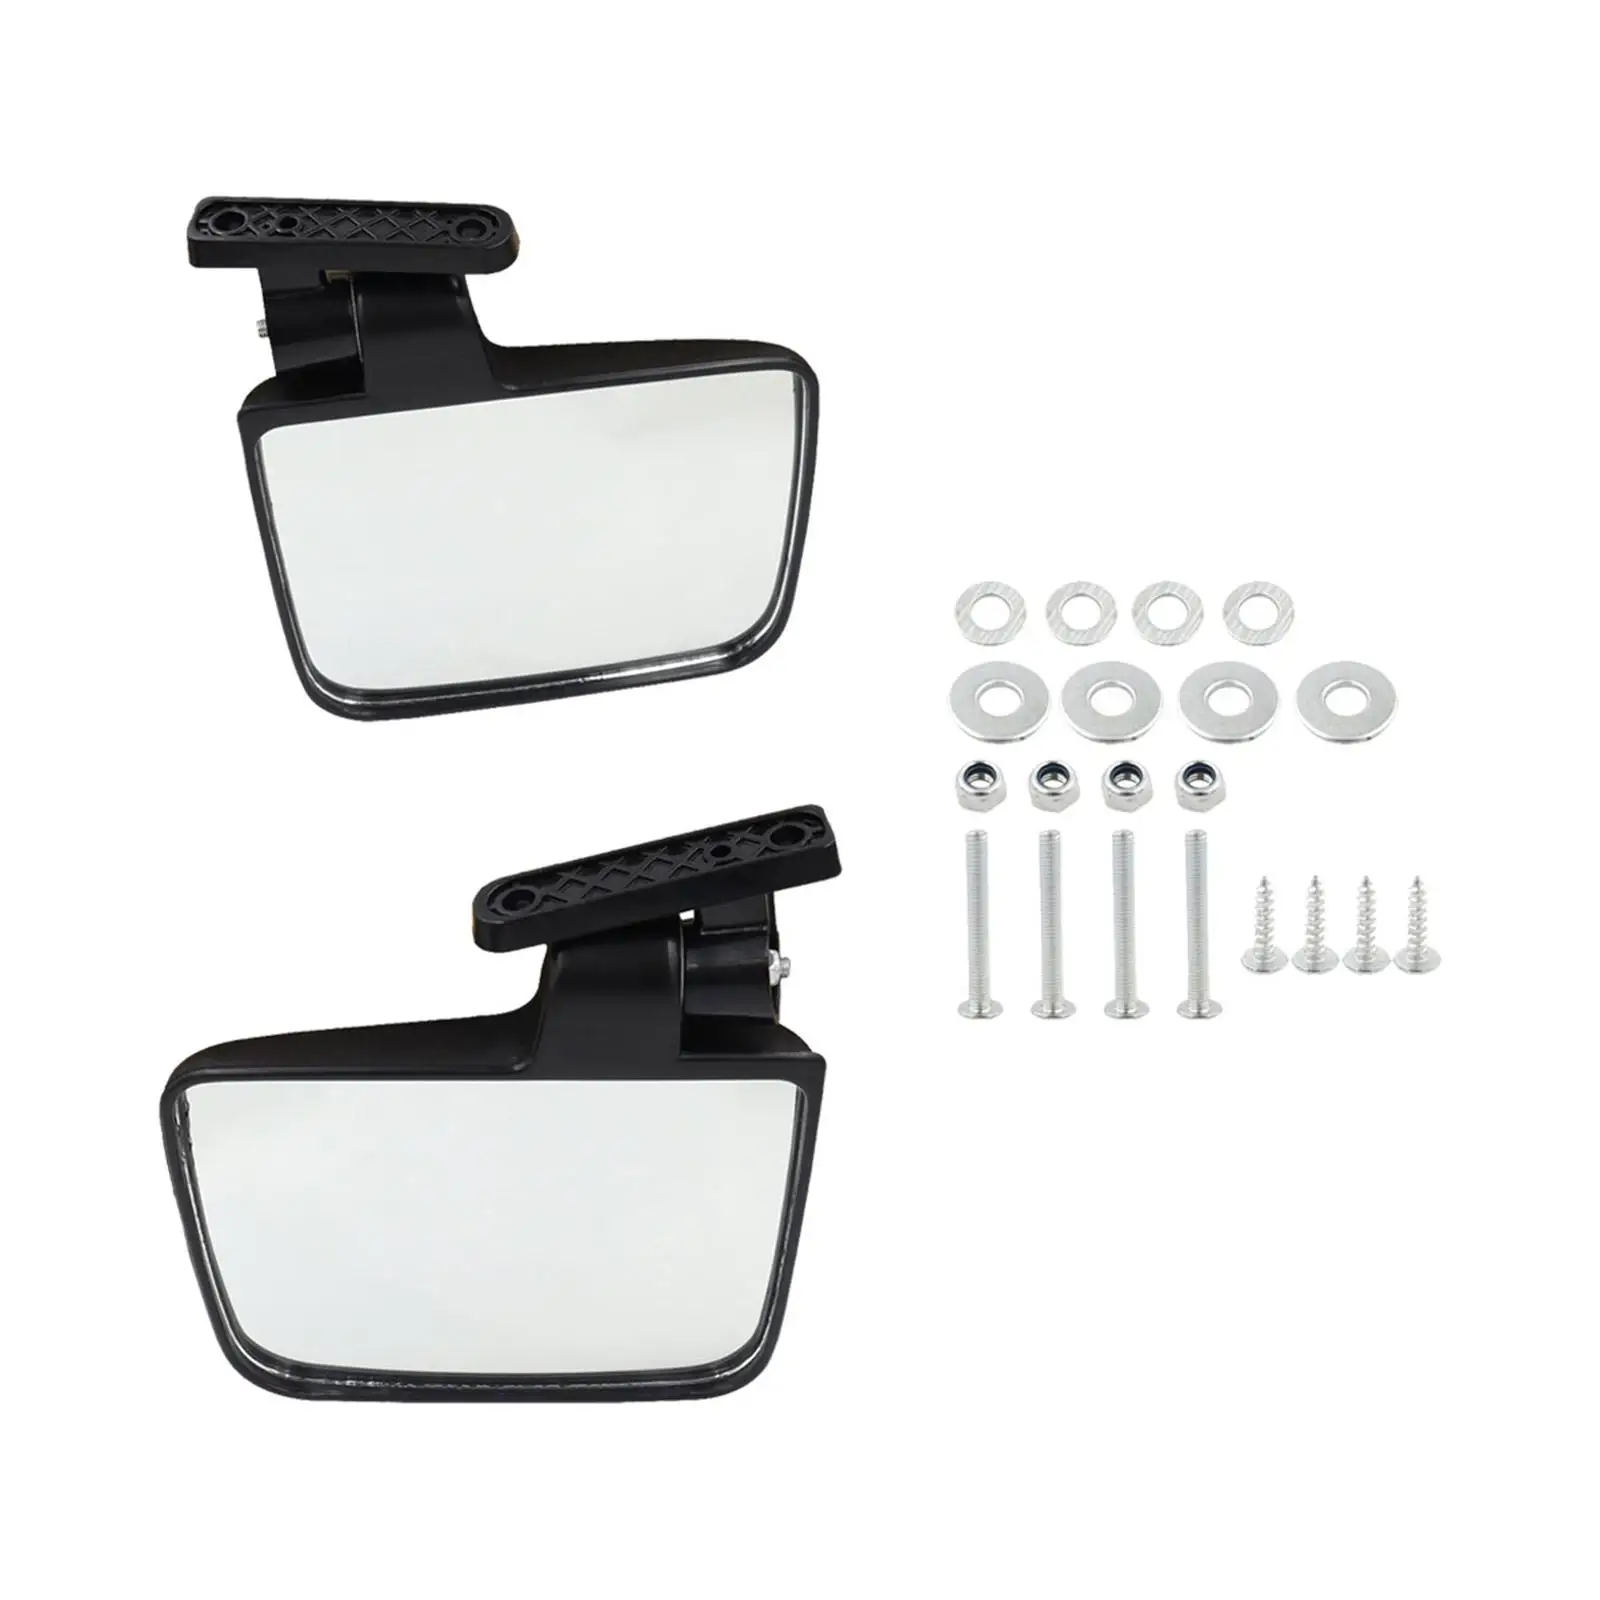 Golf Cart Folding Side View Mirrors Kit Helping to Avoid Blind Spots Lightweight Easy Installation Adjustable Joint Accessory